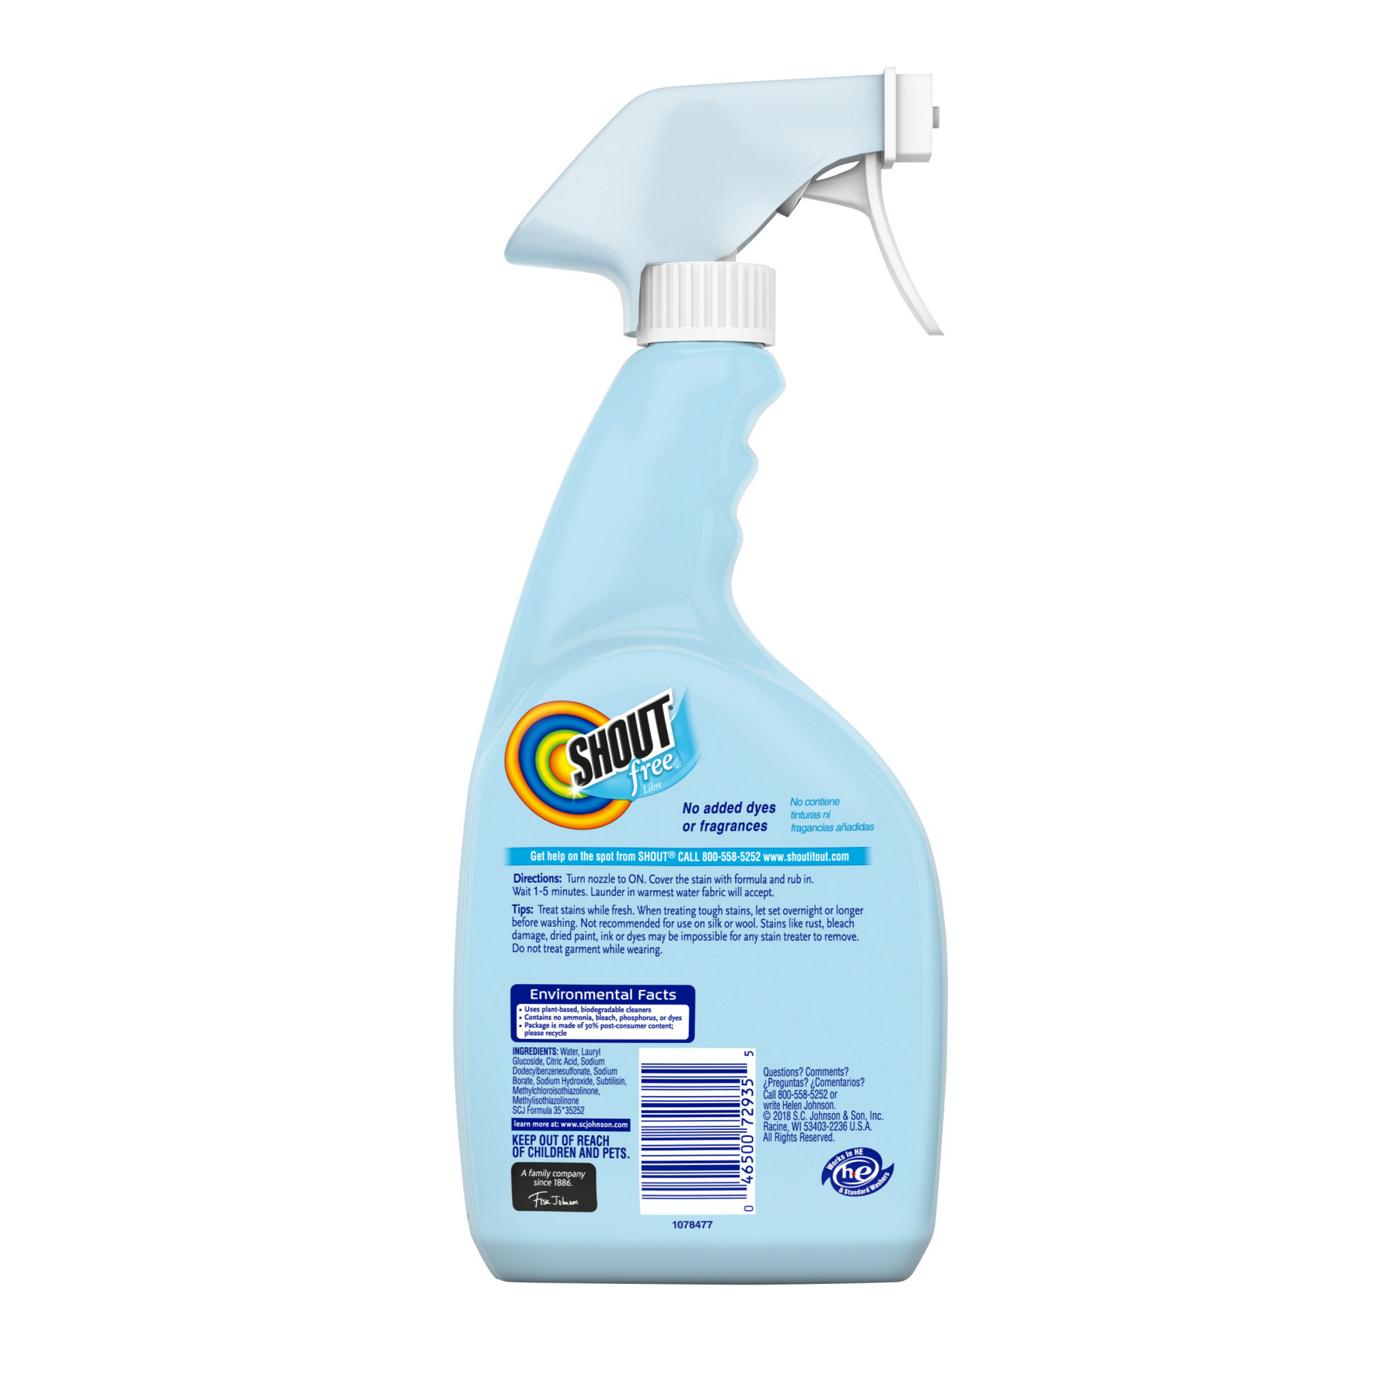 Shout Dye & Fragrance Free Laundry Stain Remover; image 6 of 10